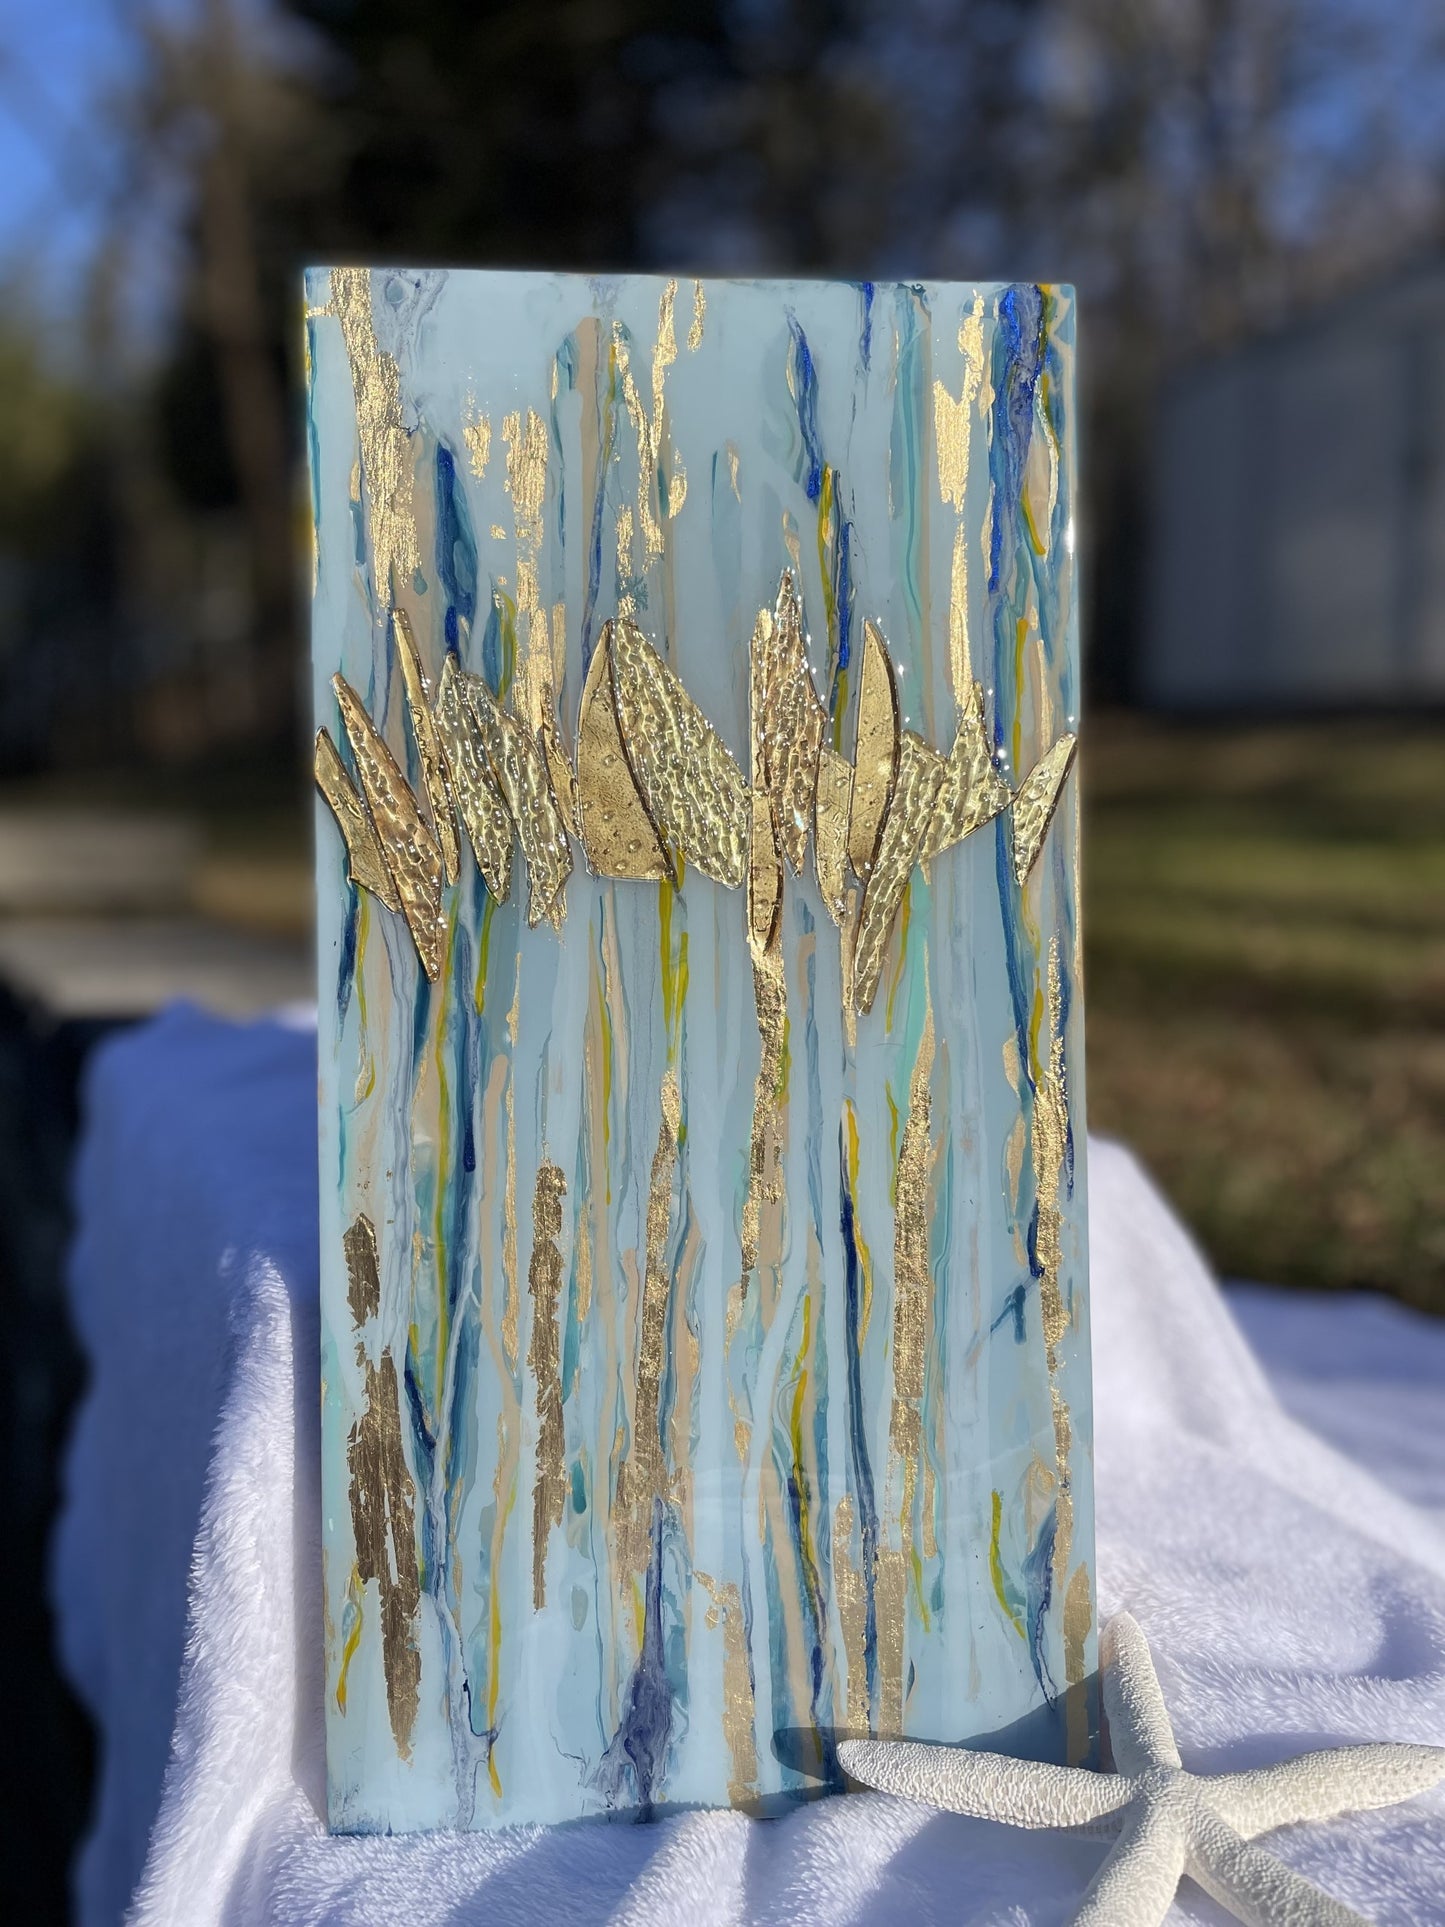 Contemporary Coastal Art with beautiful blues and gold